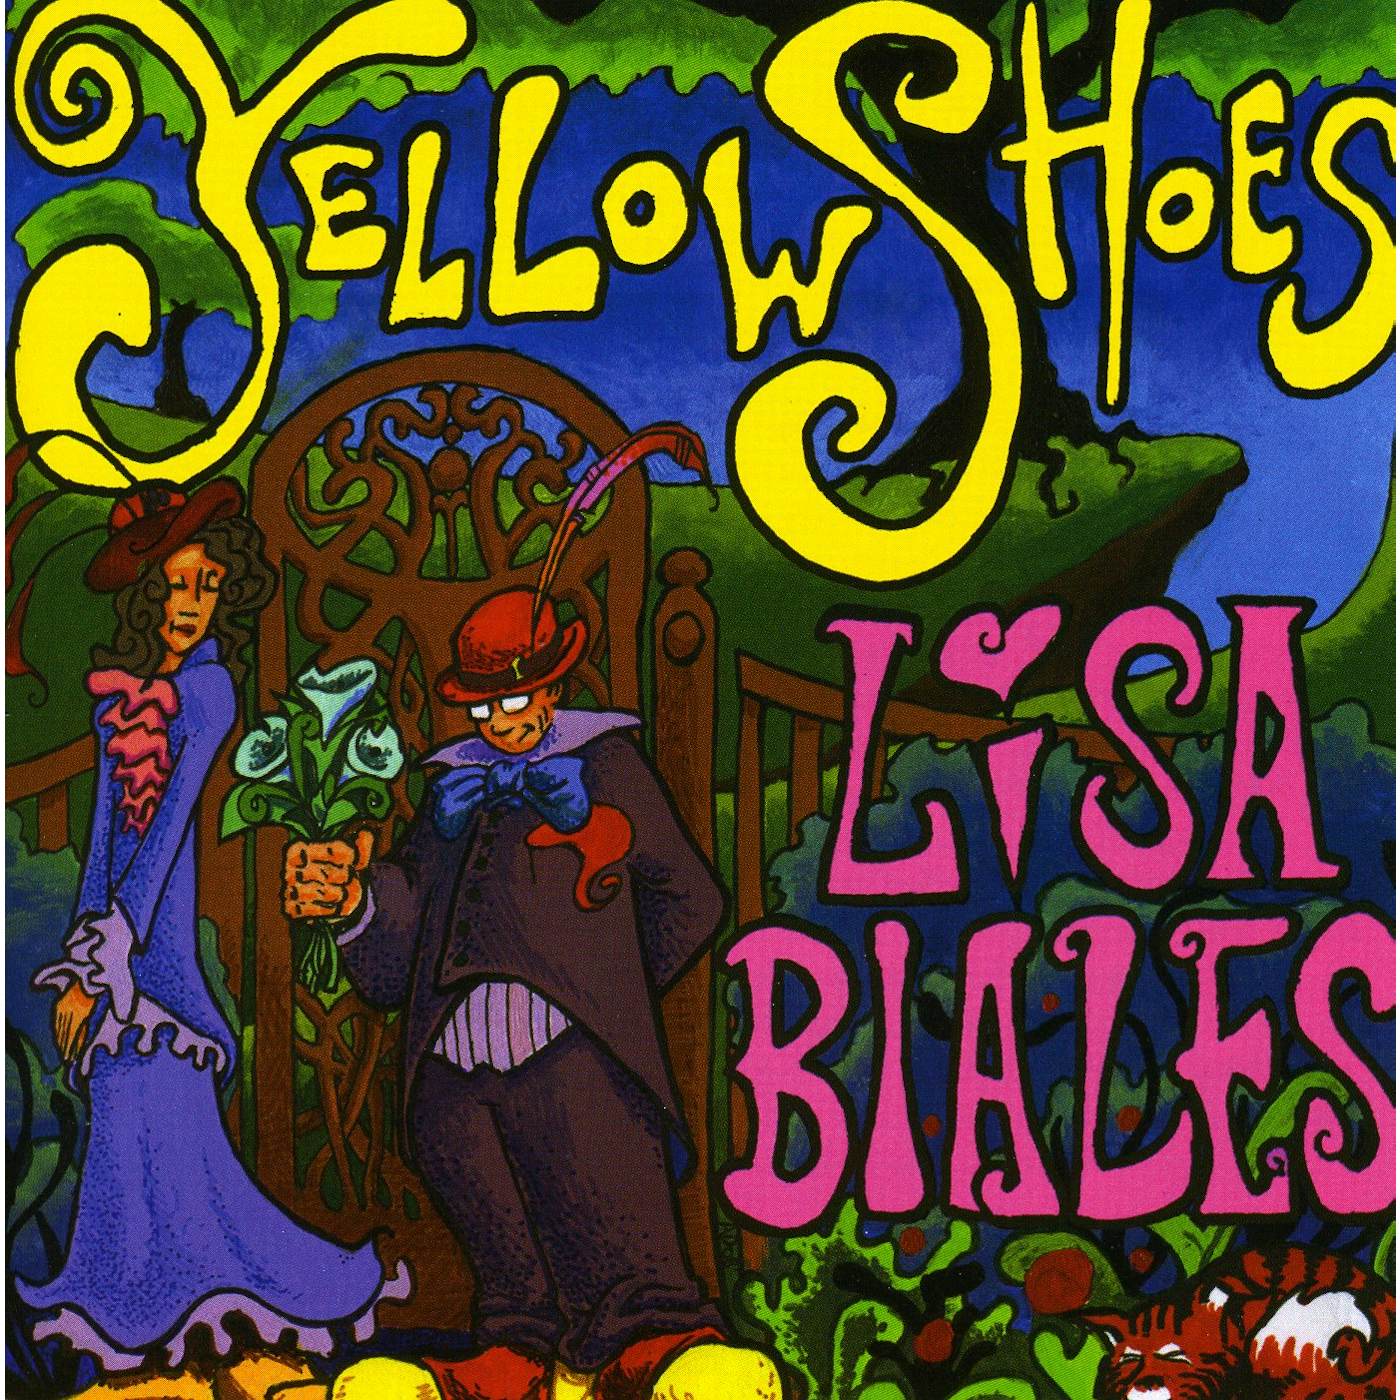 Lisa Biales YELLOW SHOES CD